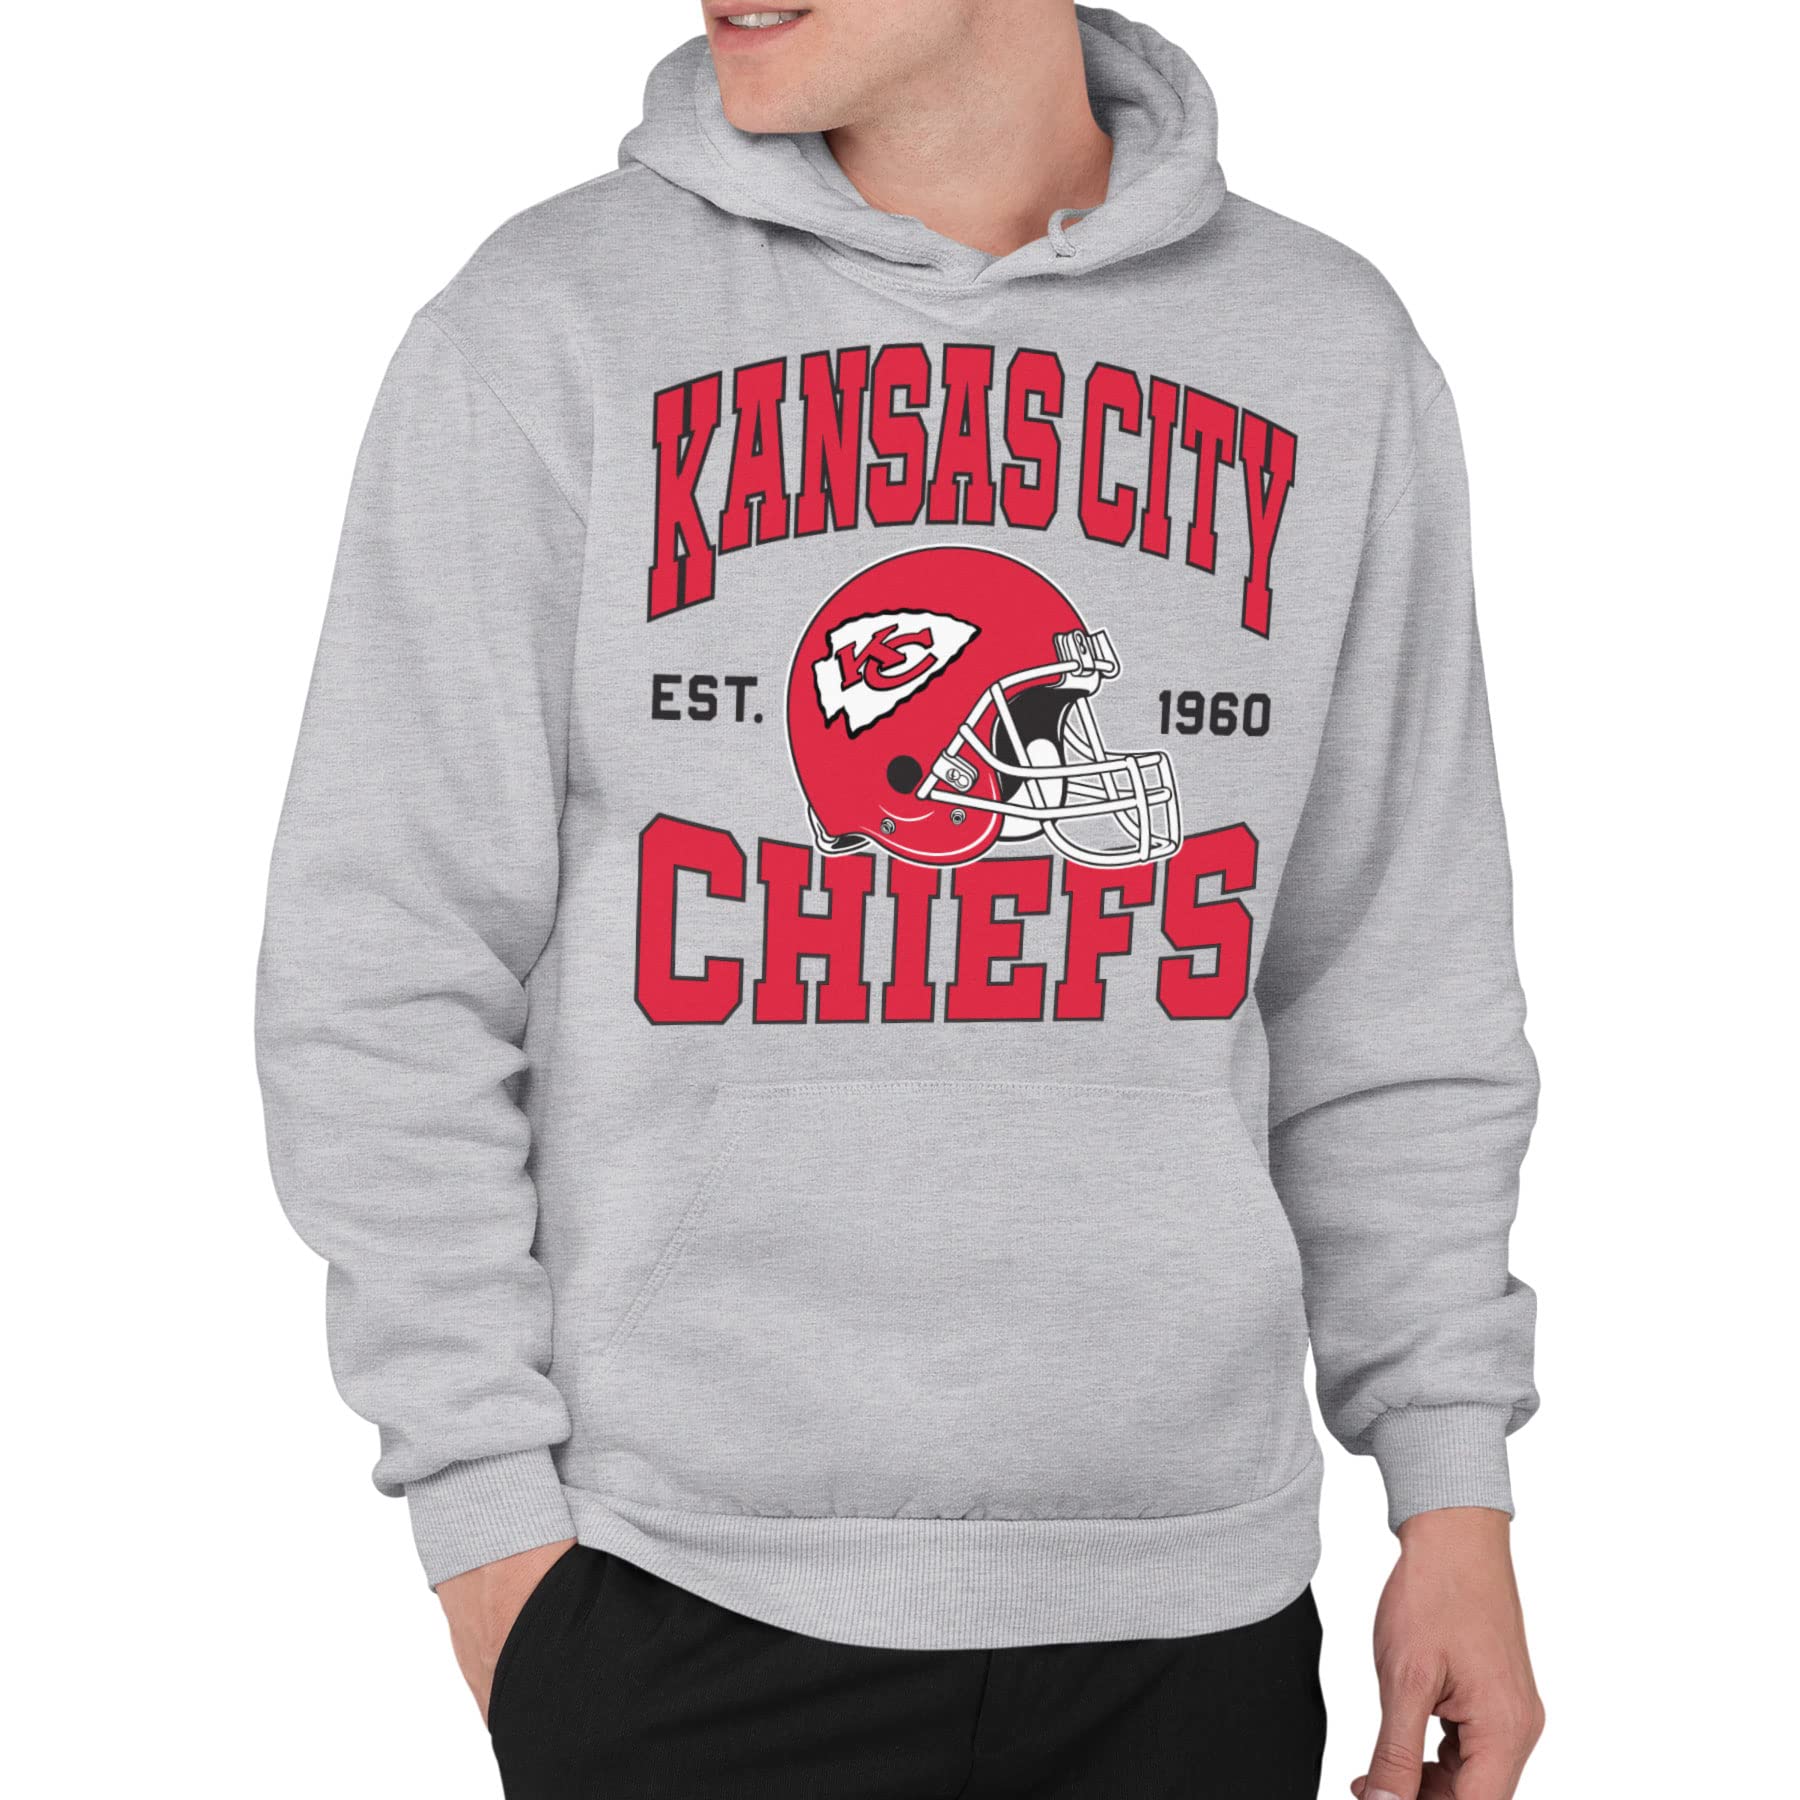 Junk Food Clothing x NFL - Kansas City Chiefs - Team Helmet - Adult Pullover Hooded Sweatshirt for Men and Women - Size Small